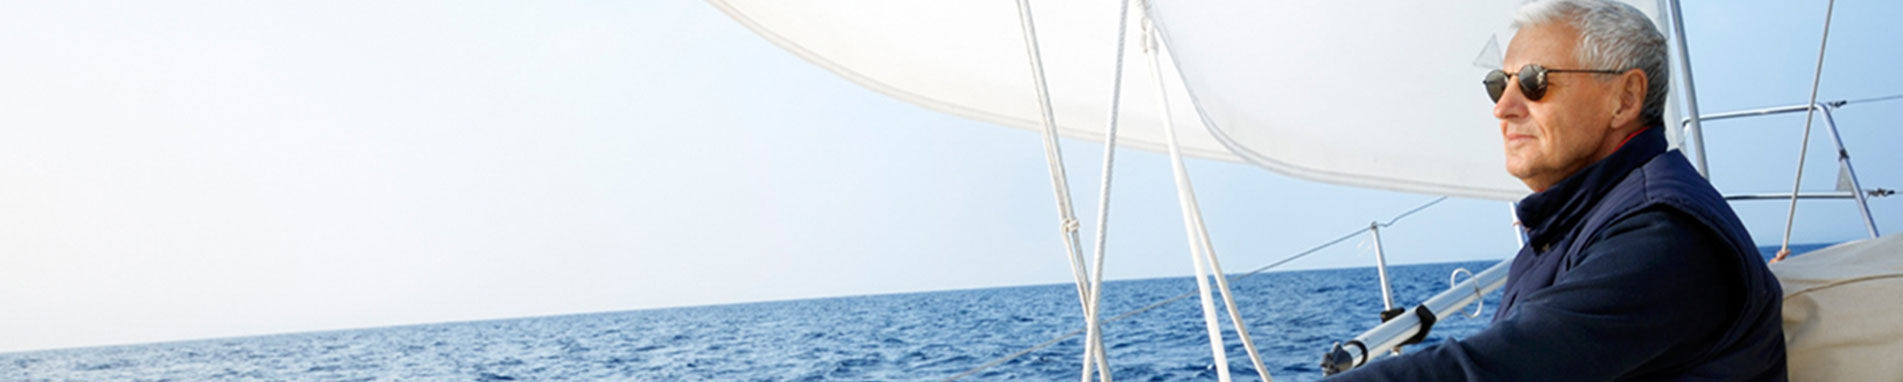 Texas Boat Insurance coverage